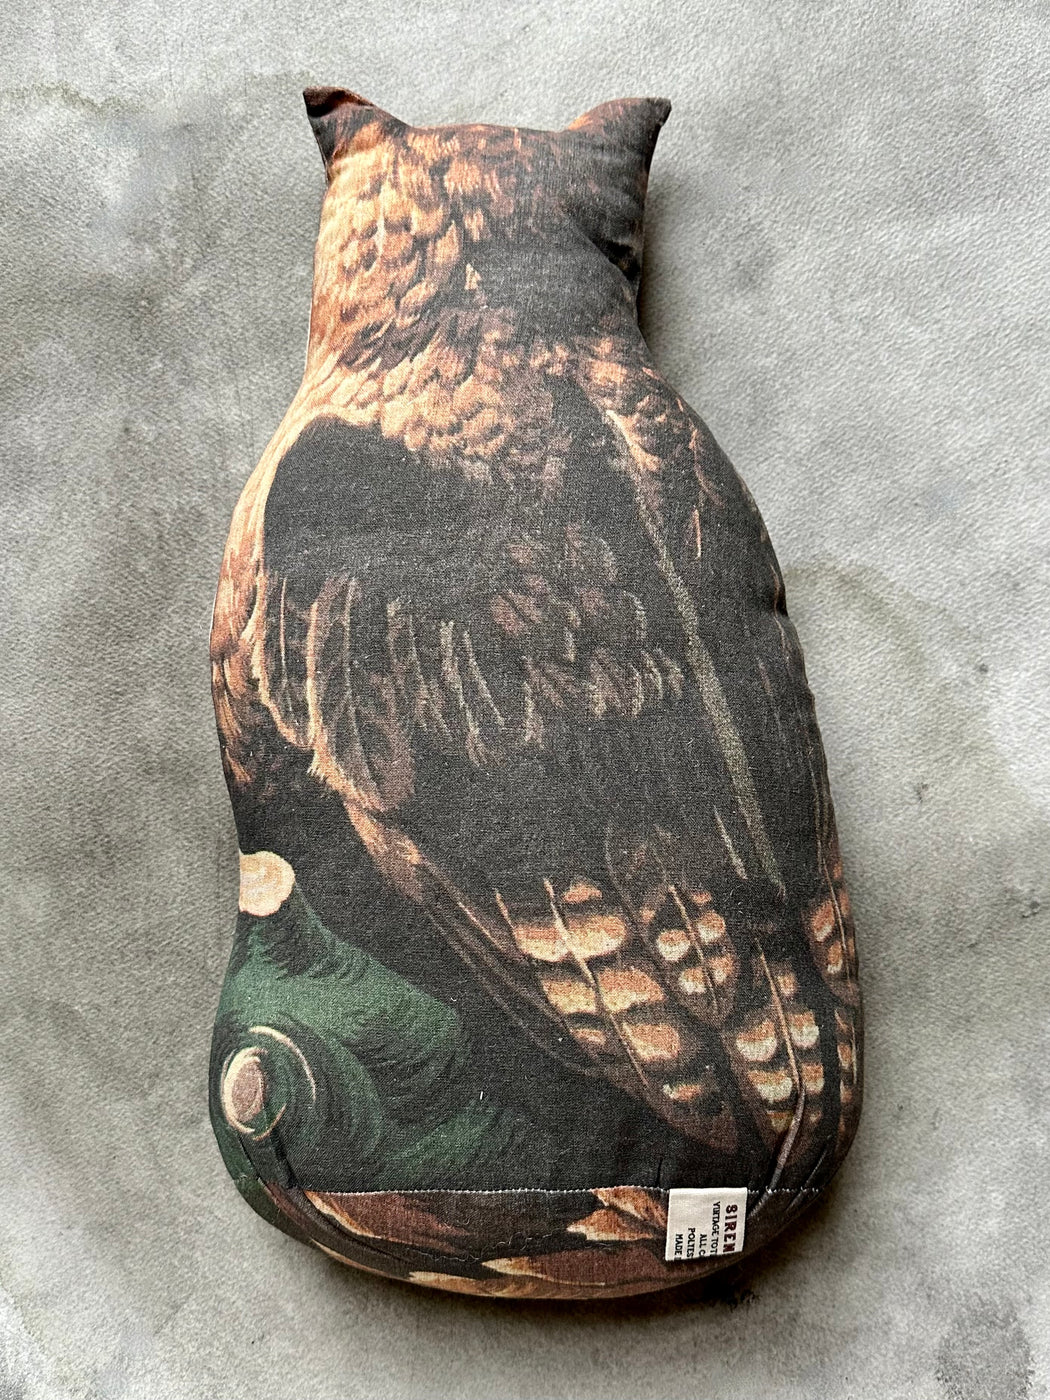 "Vintage Owl" Pillow by Siren Song